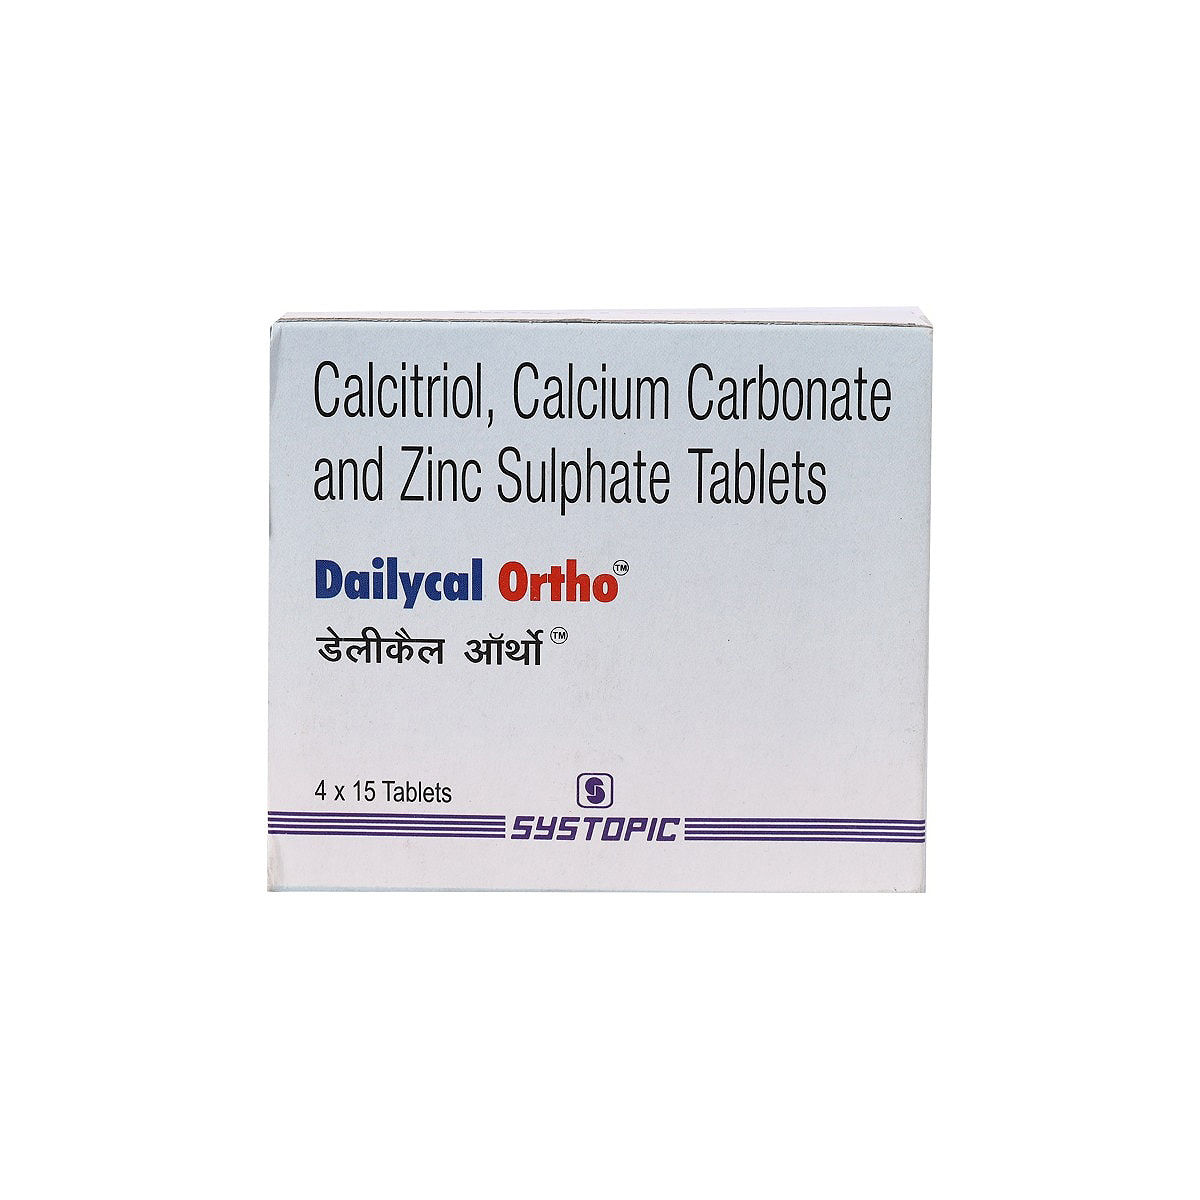 Dailycal Ortho Tablet 15's, Pack of 15 TABLETS